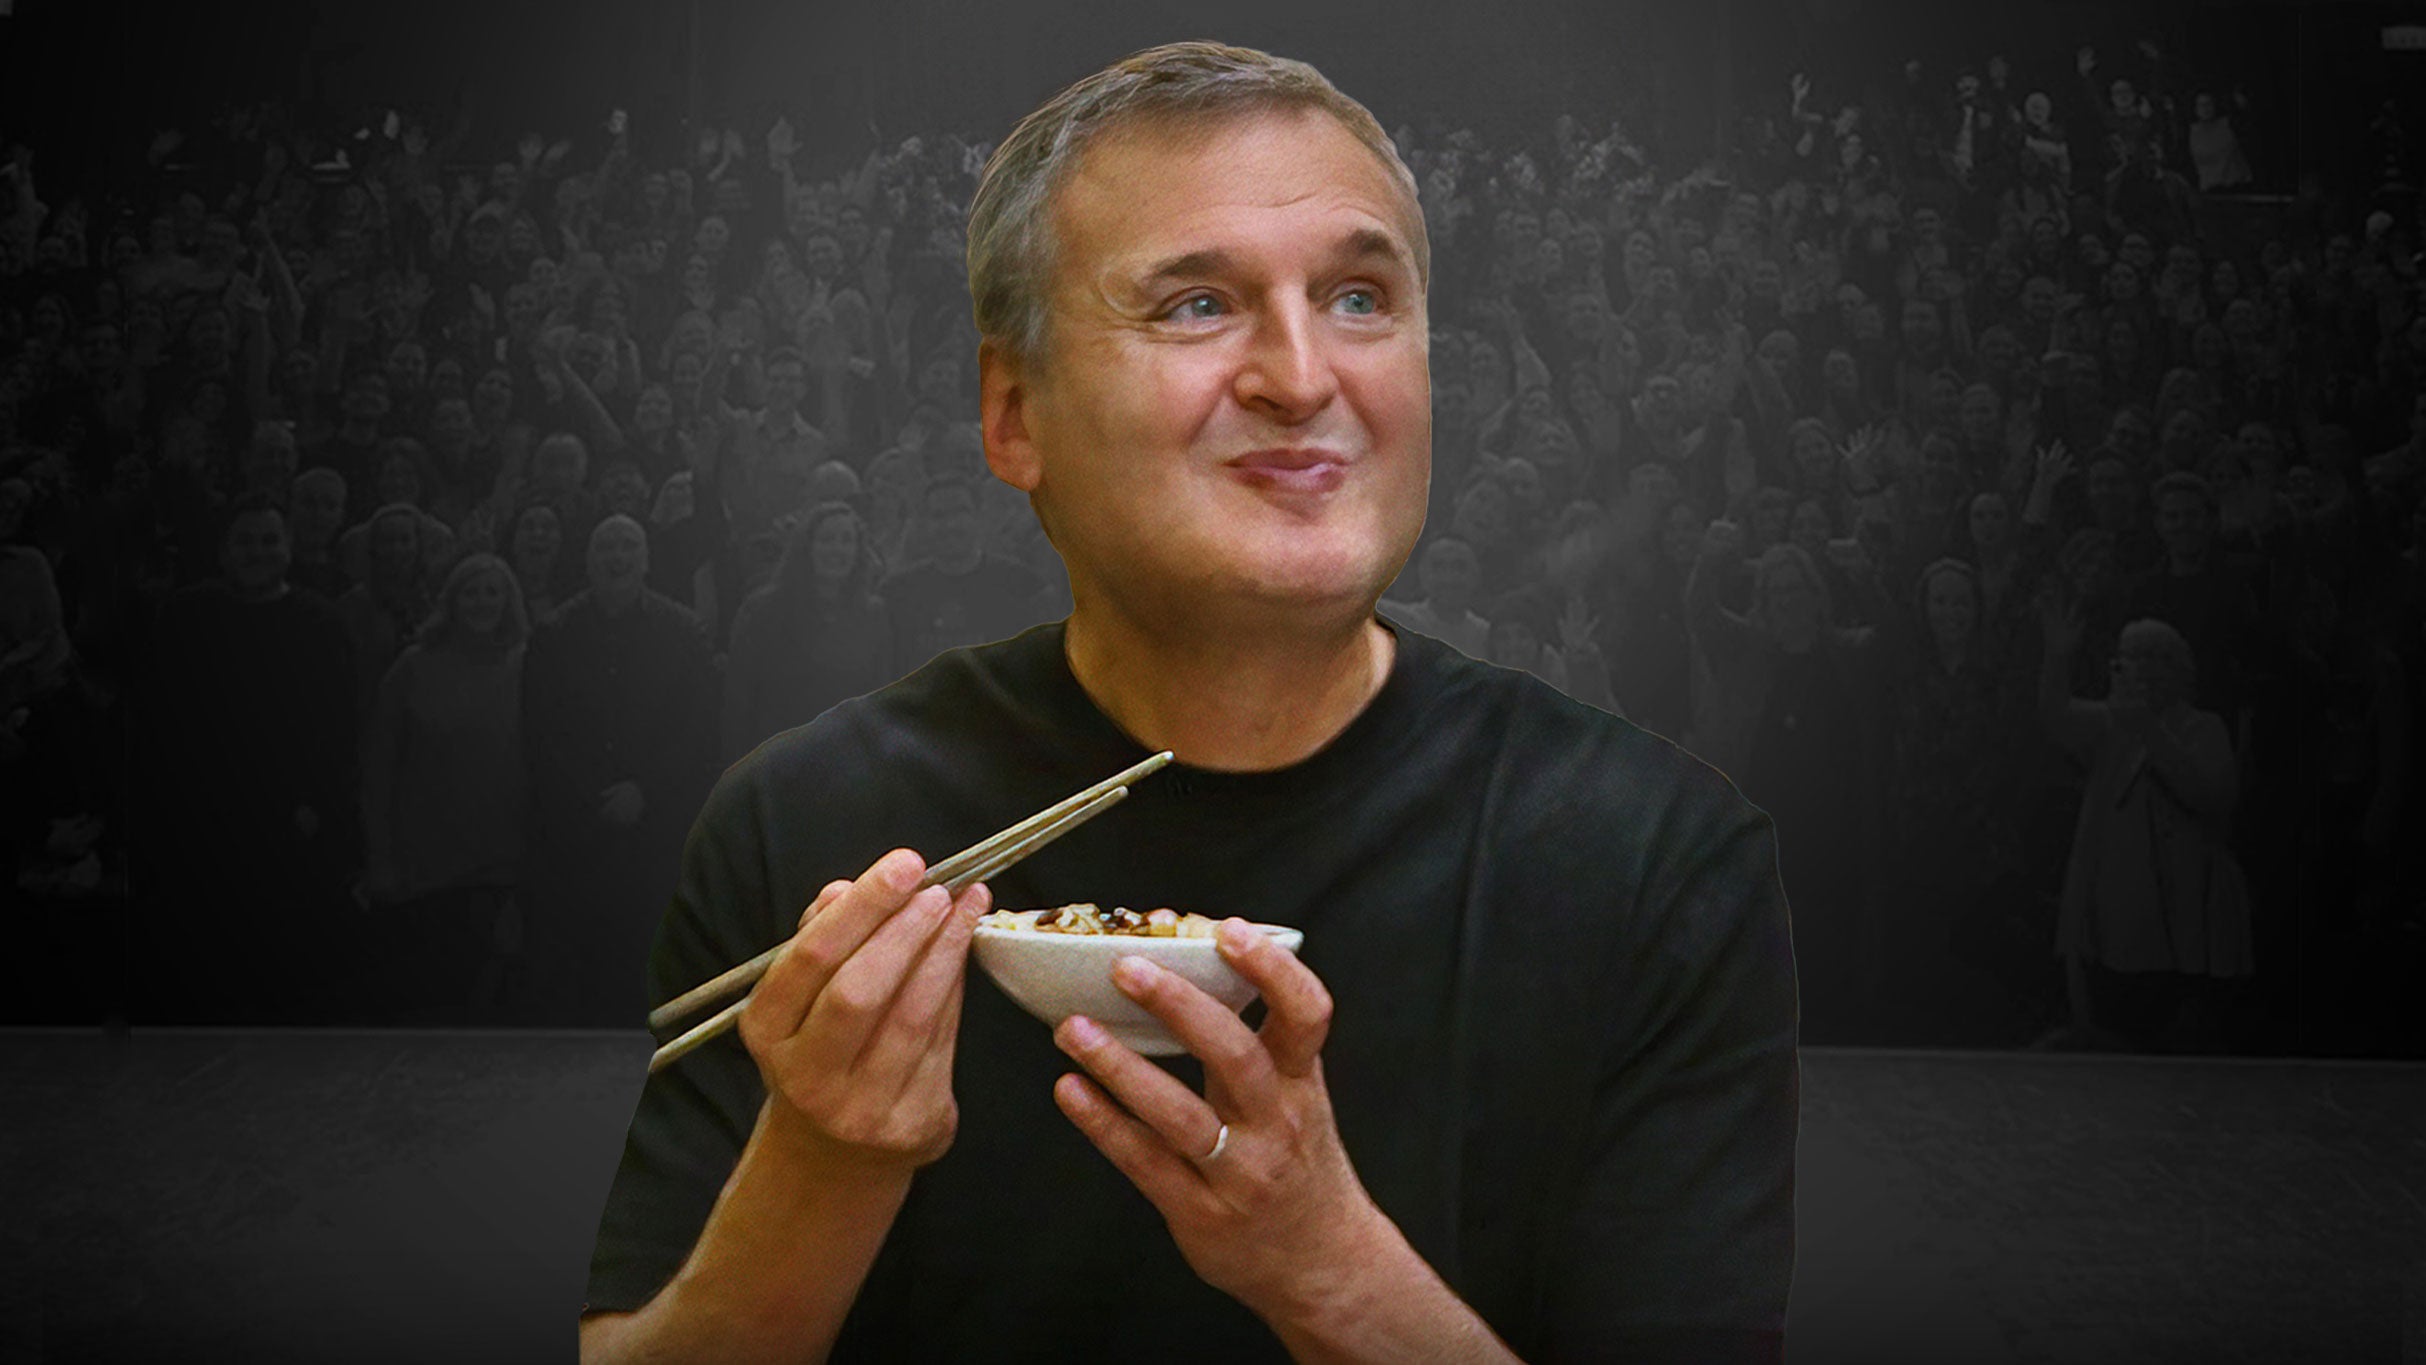 An Evening With Phil Rosenthal Of "Somebody Feed Phil" in Sacramento promo photo for Live Nation presale offer code